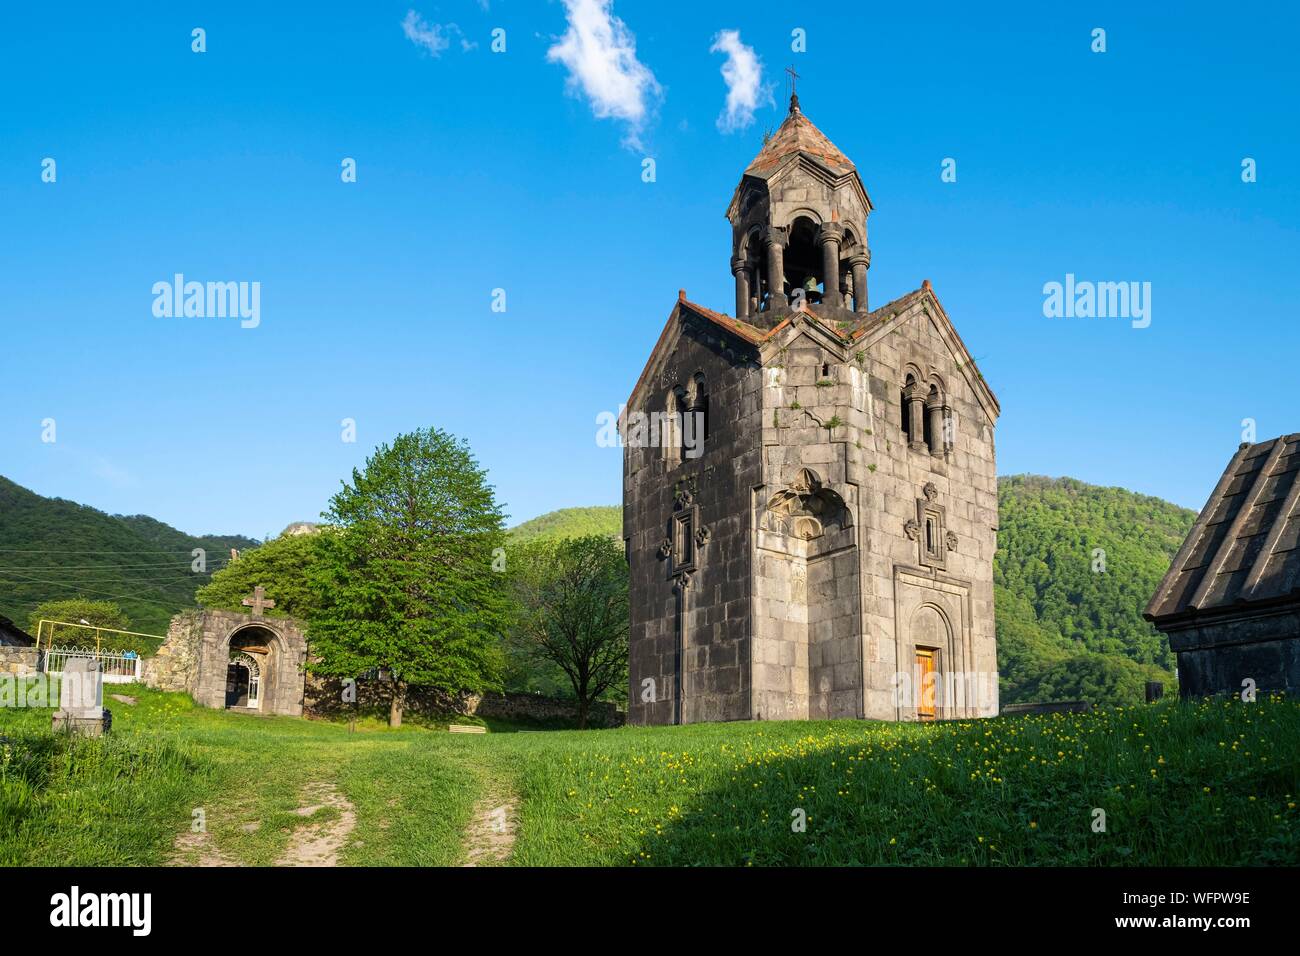 Armenia, Lorri region, Debed valley, surroundings of Alaverdi, Haghpat monastery, founded between the 10th and 13th centuries, a UNESCO World Heritage site Stock Photo